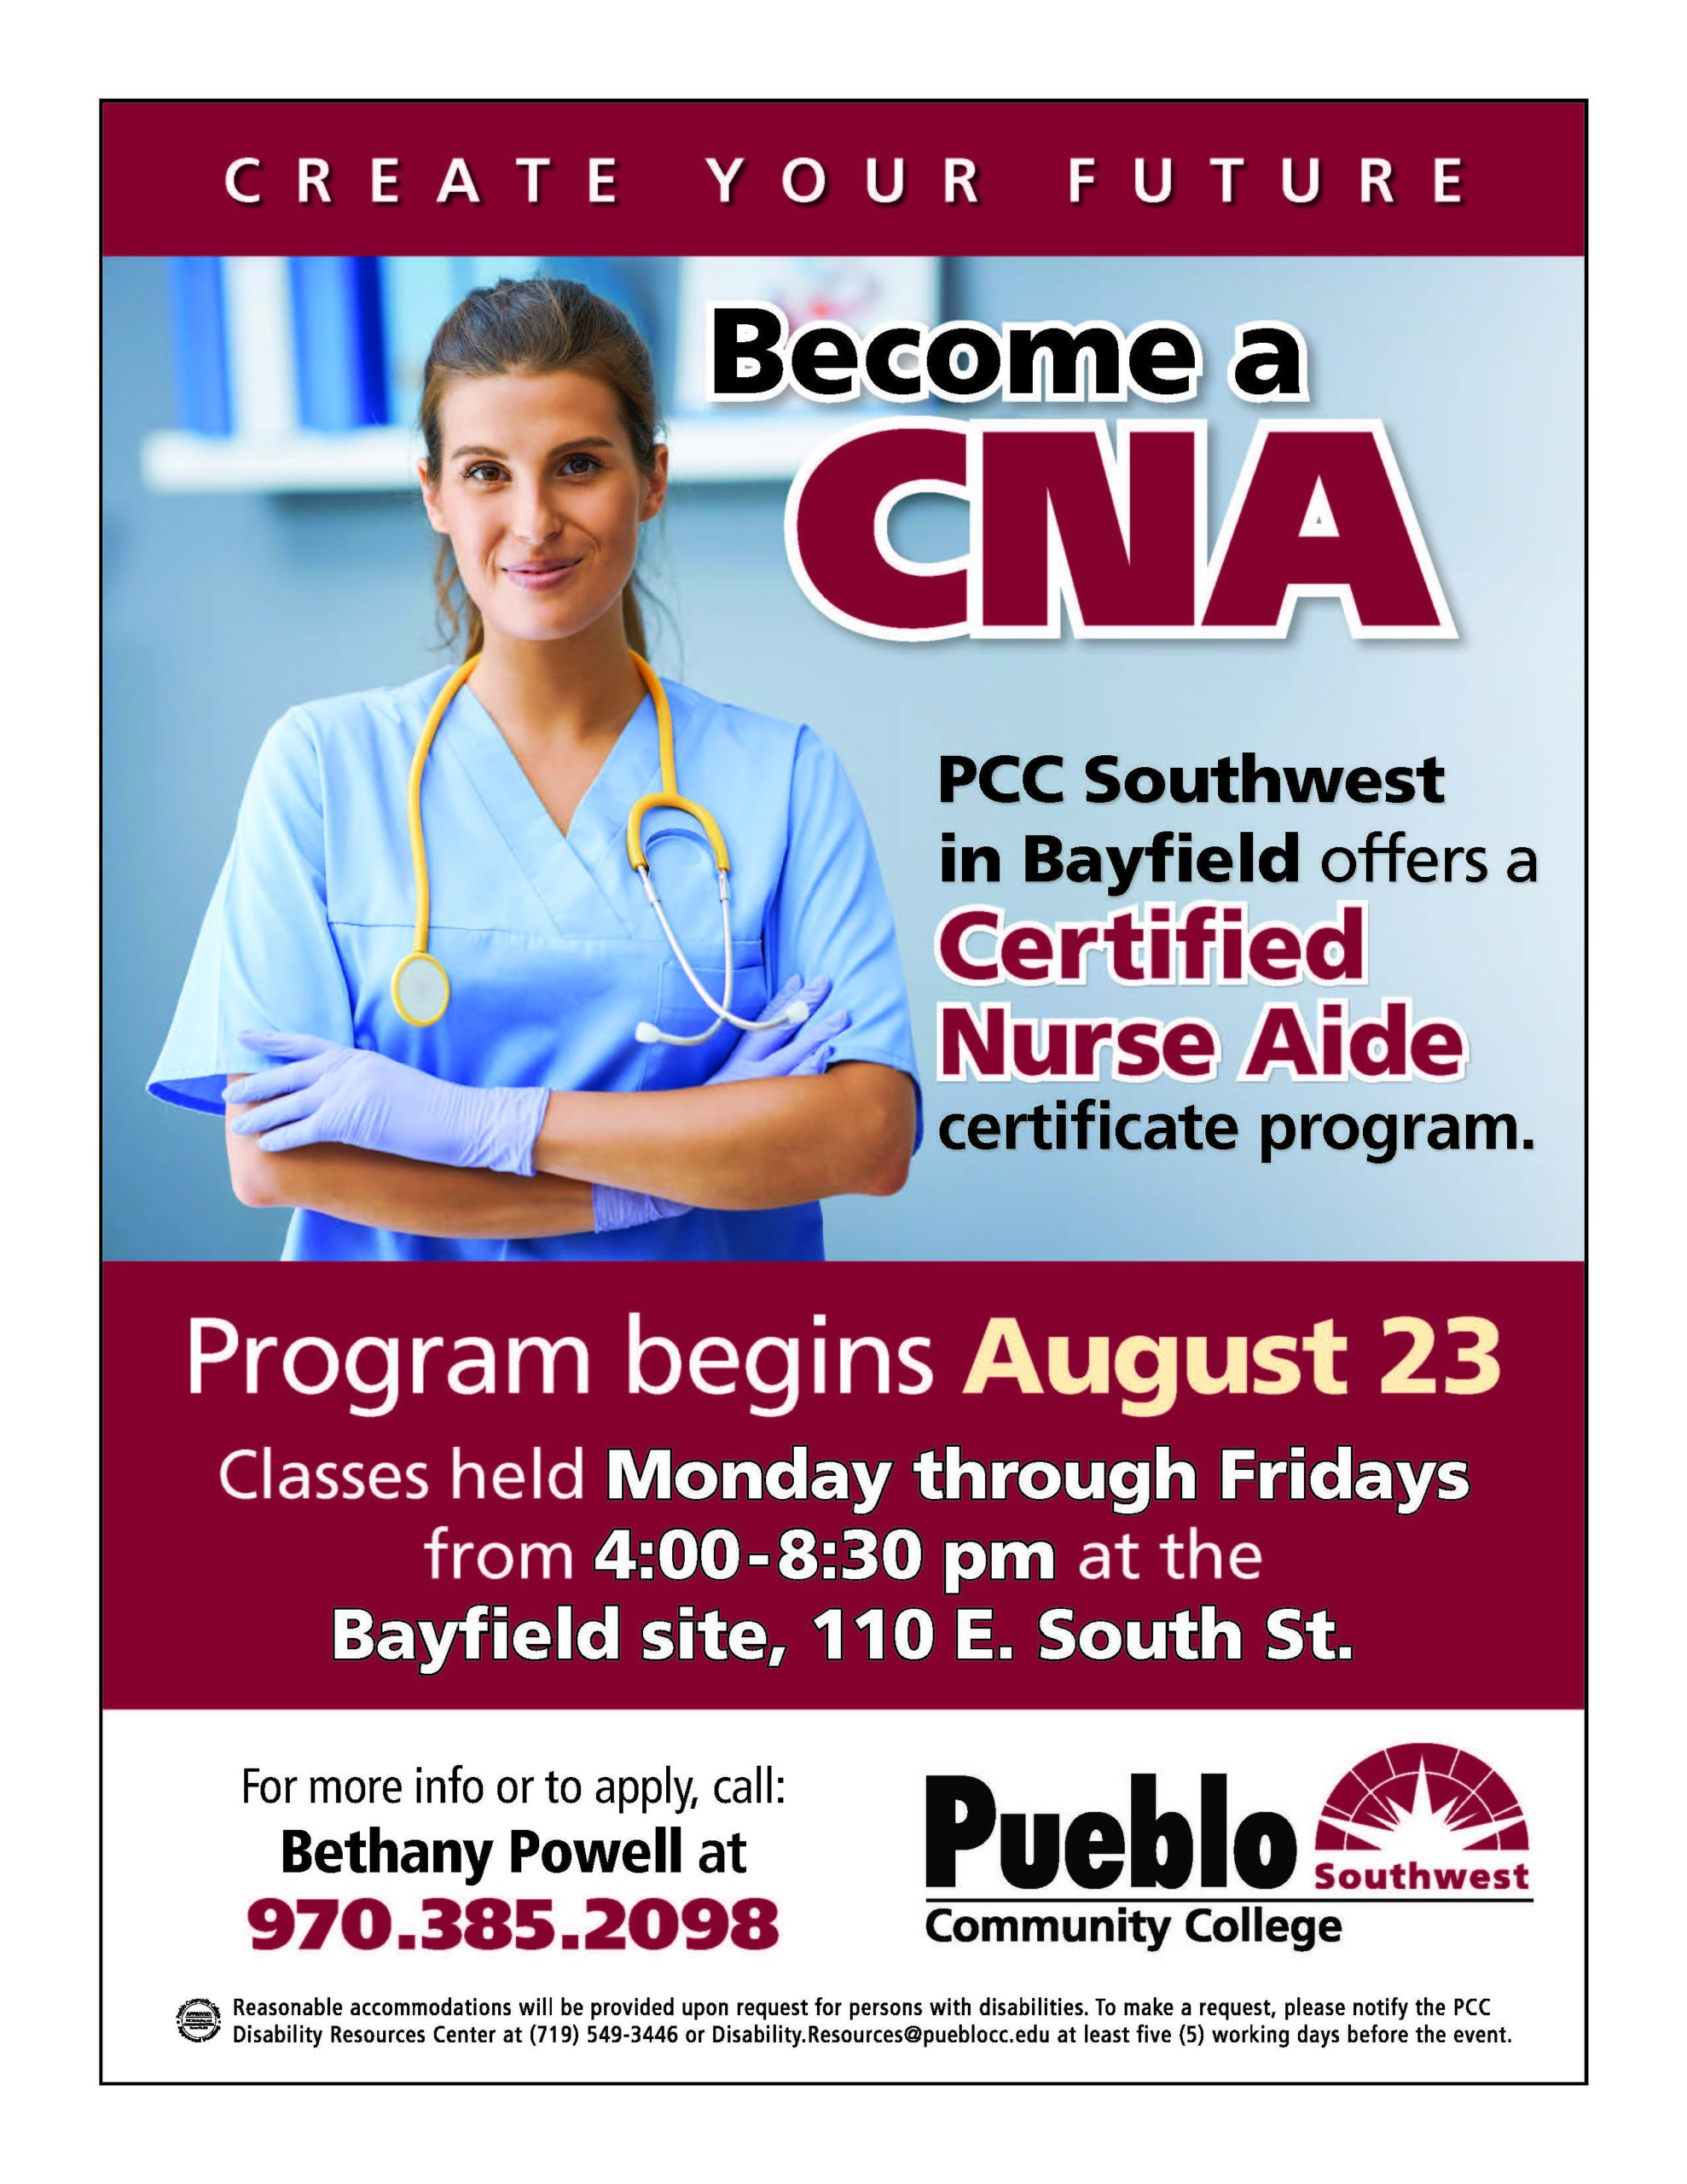 Become a CNA Nurse Aid - Pueblo Community College Offers a Certified Nurse Aid Certificate Program in Bayfield. For more info or to apply, call: Bethany Powell at 970-385-2098